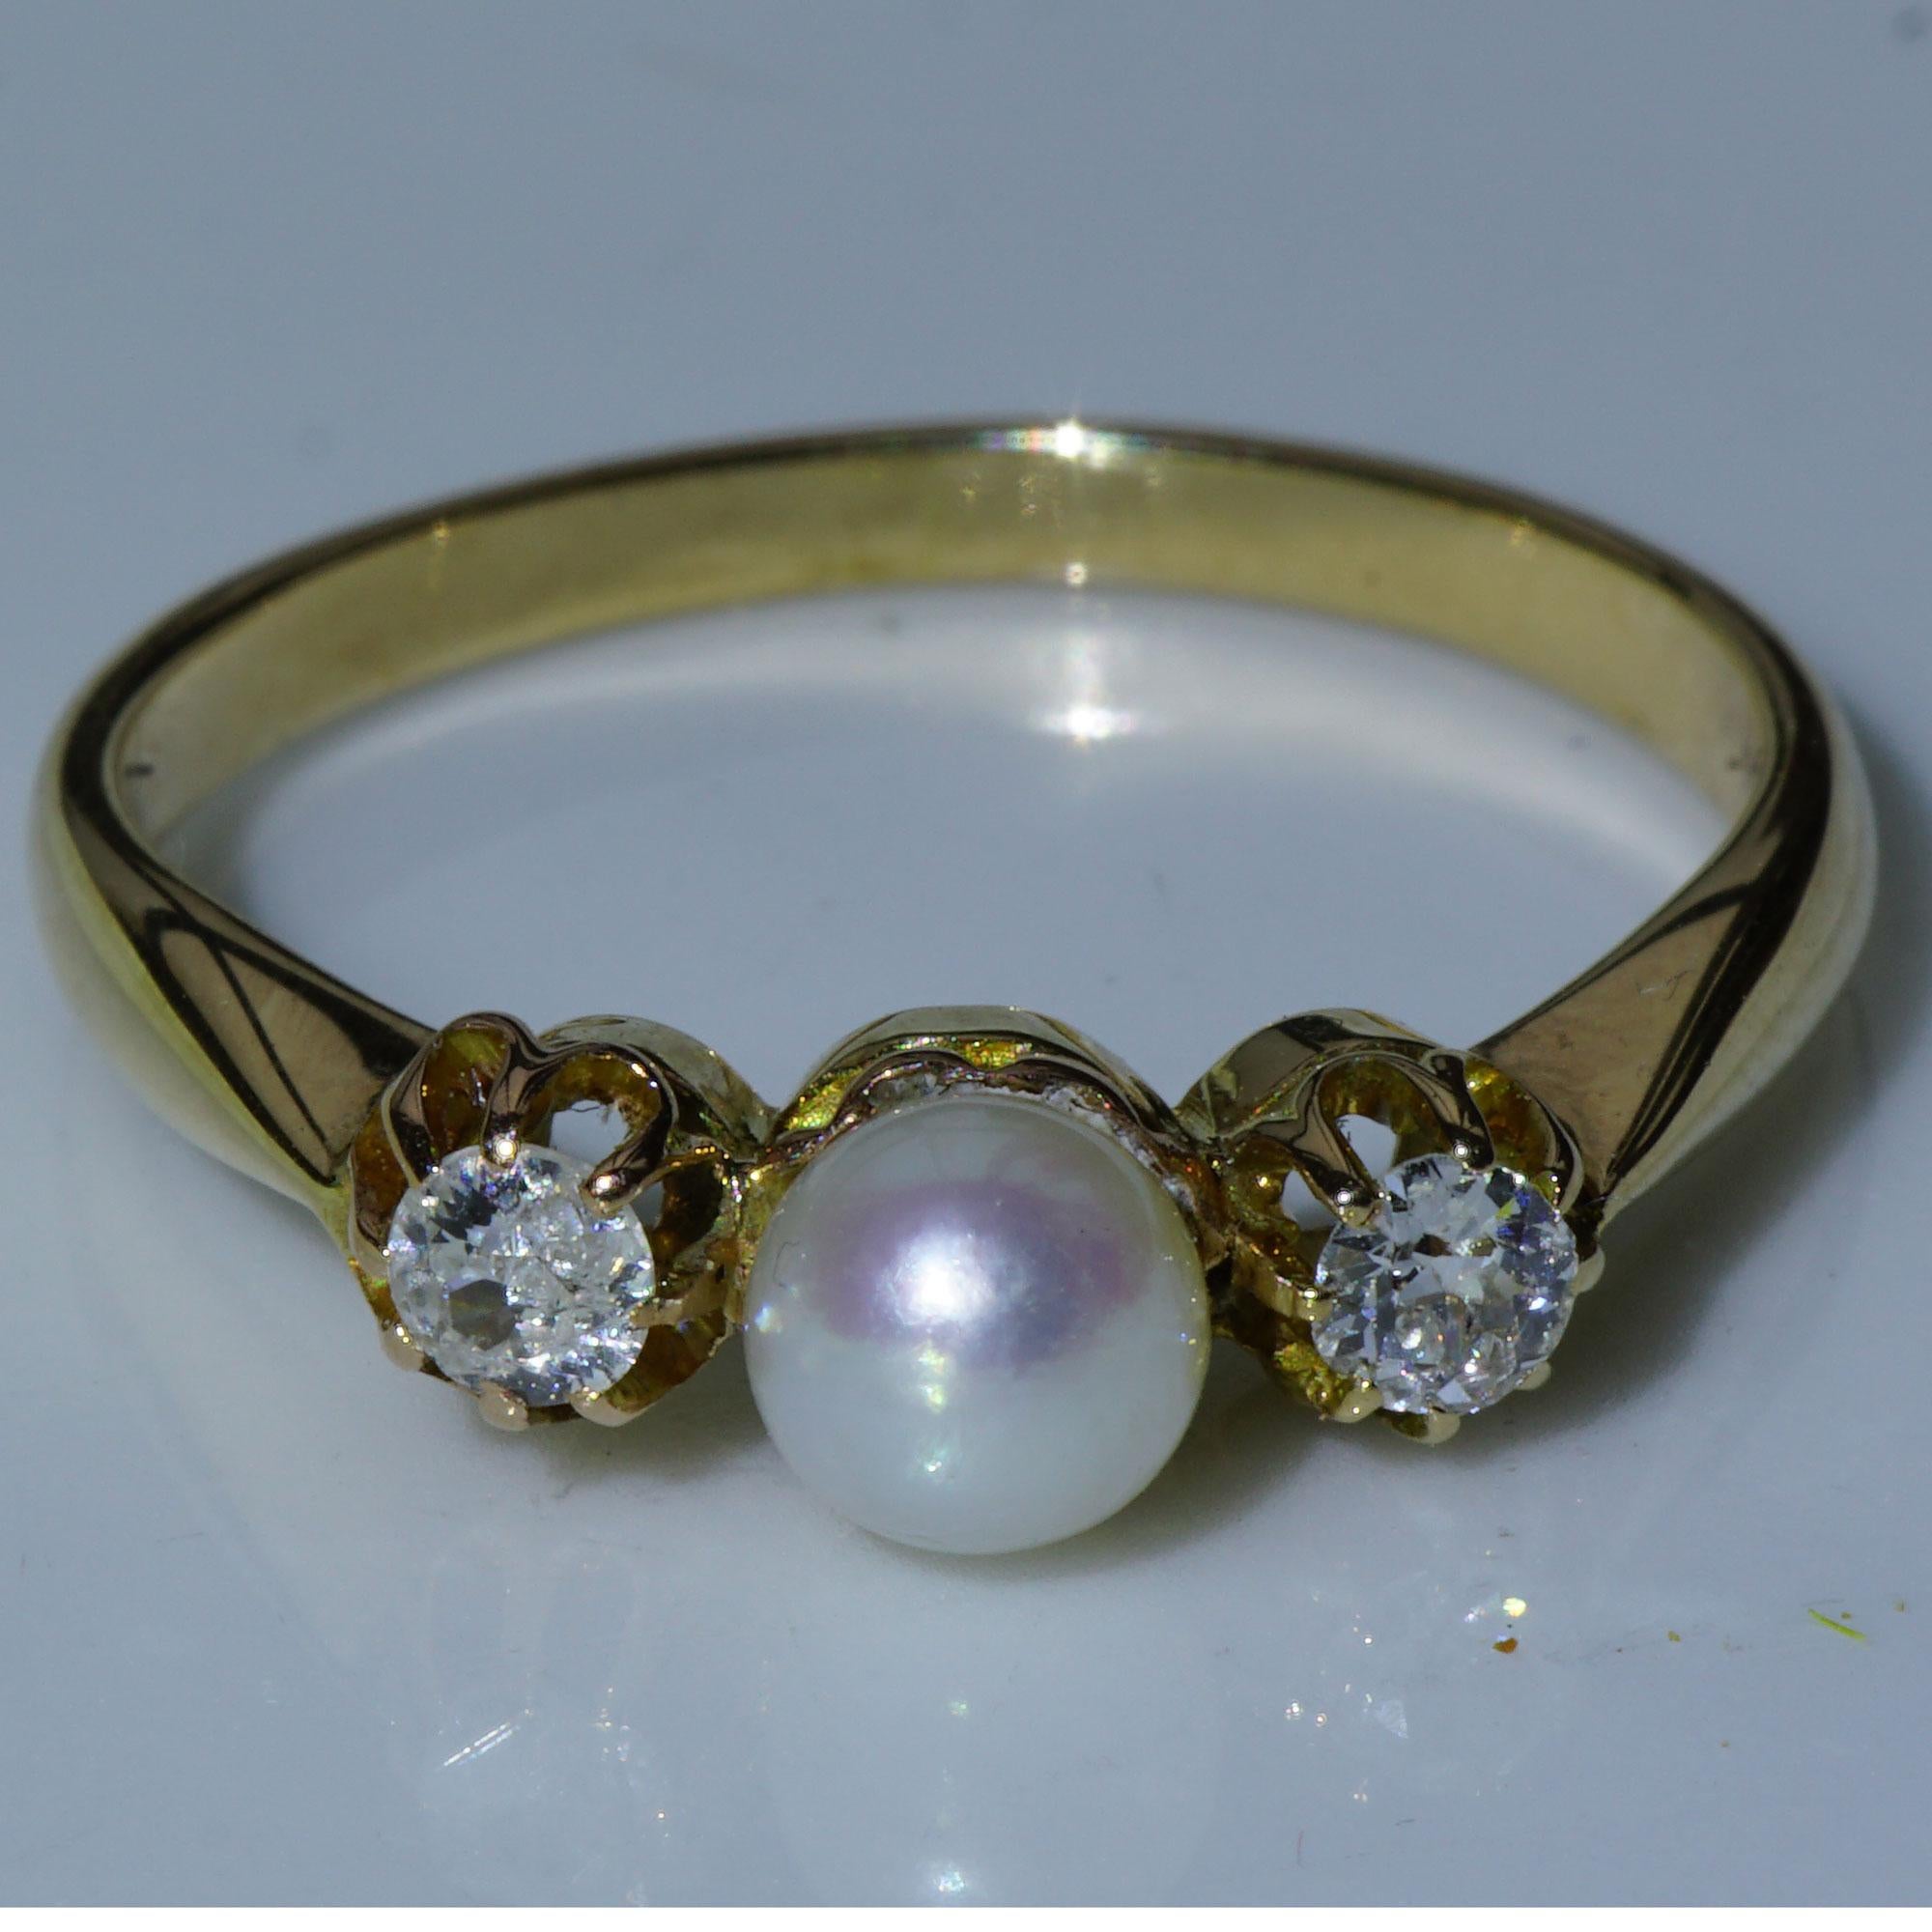 Women's or Men's Old Cut Diamond Pearl Ring 0.20 ct Yellow Gold about 1910 fine white/pink Pearl For Sale